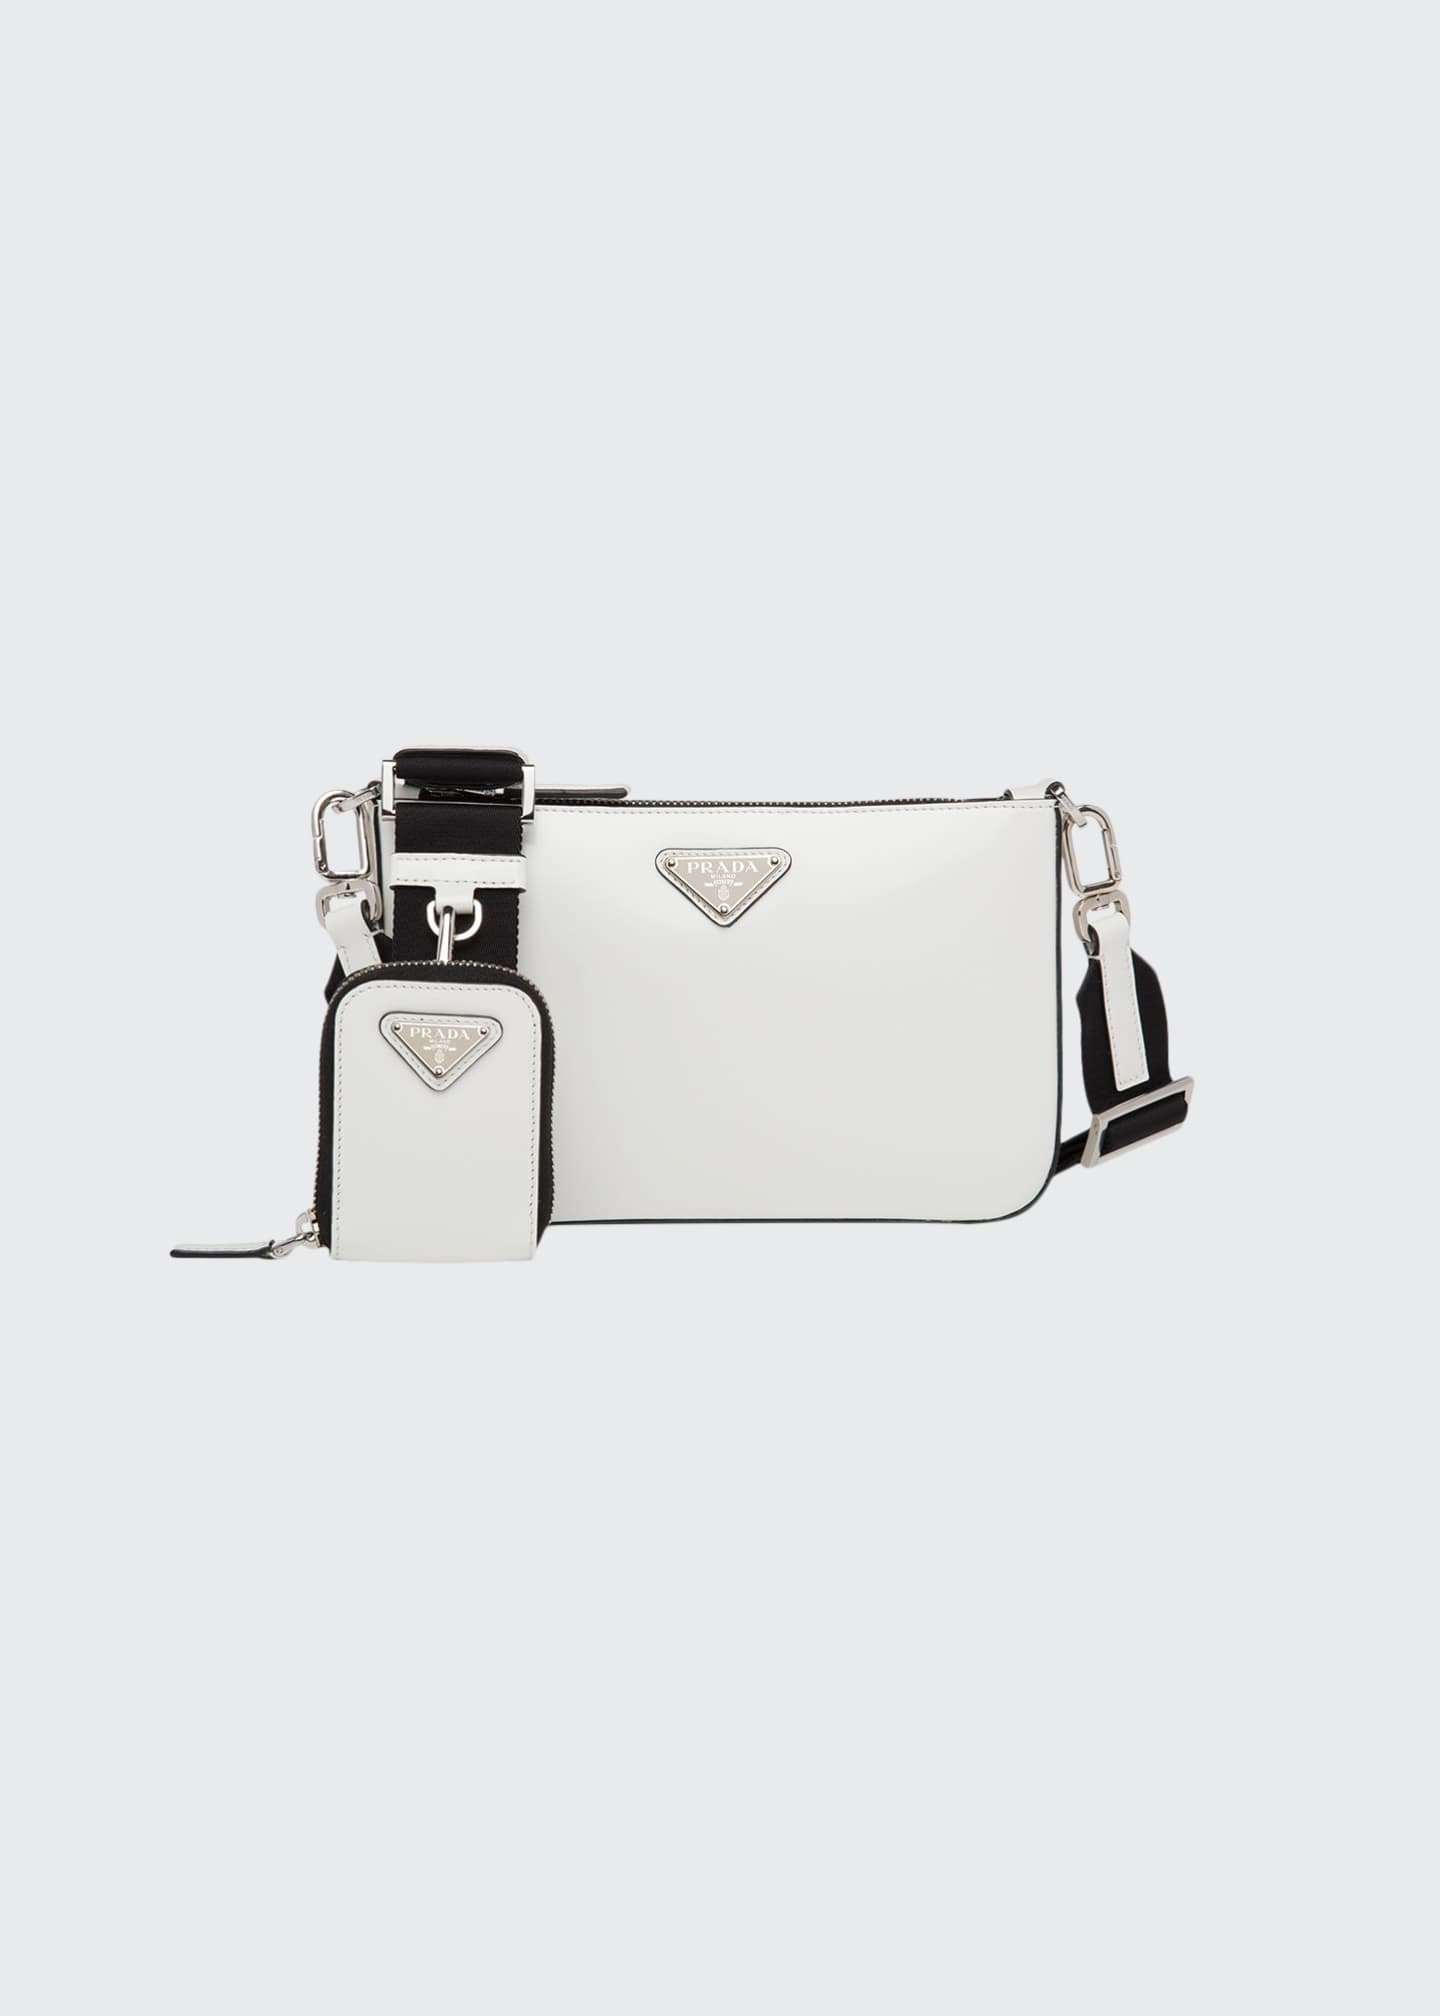 Prada Men's Brushed Leather Crossbody Bag with Pouch - Bergdorf Goodman